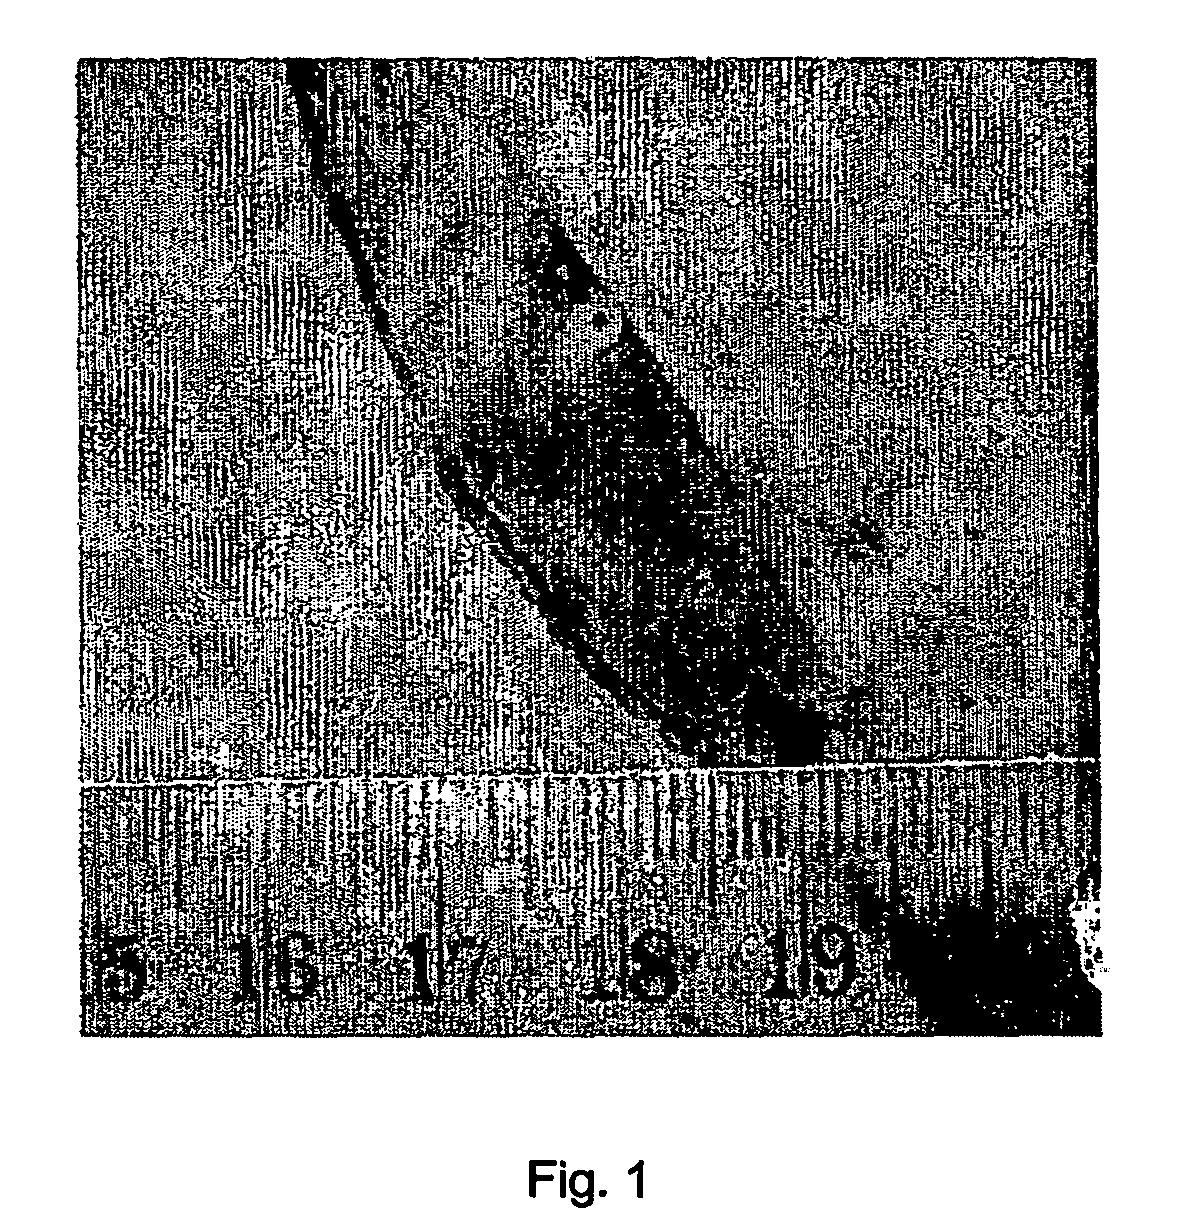 Method for soil remediation and engineering